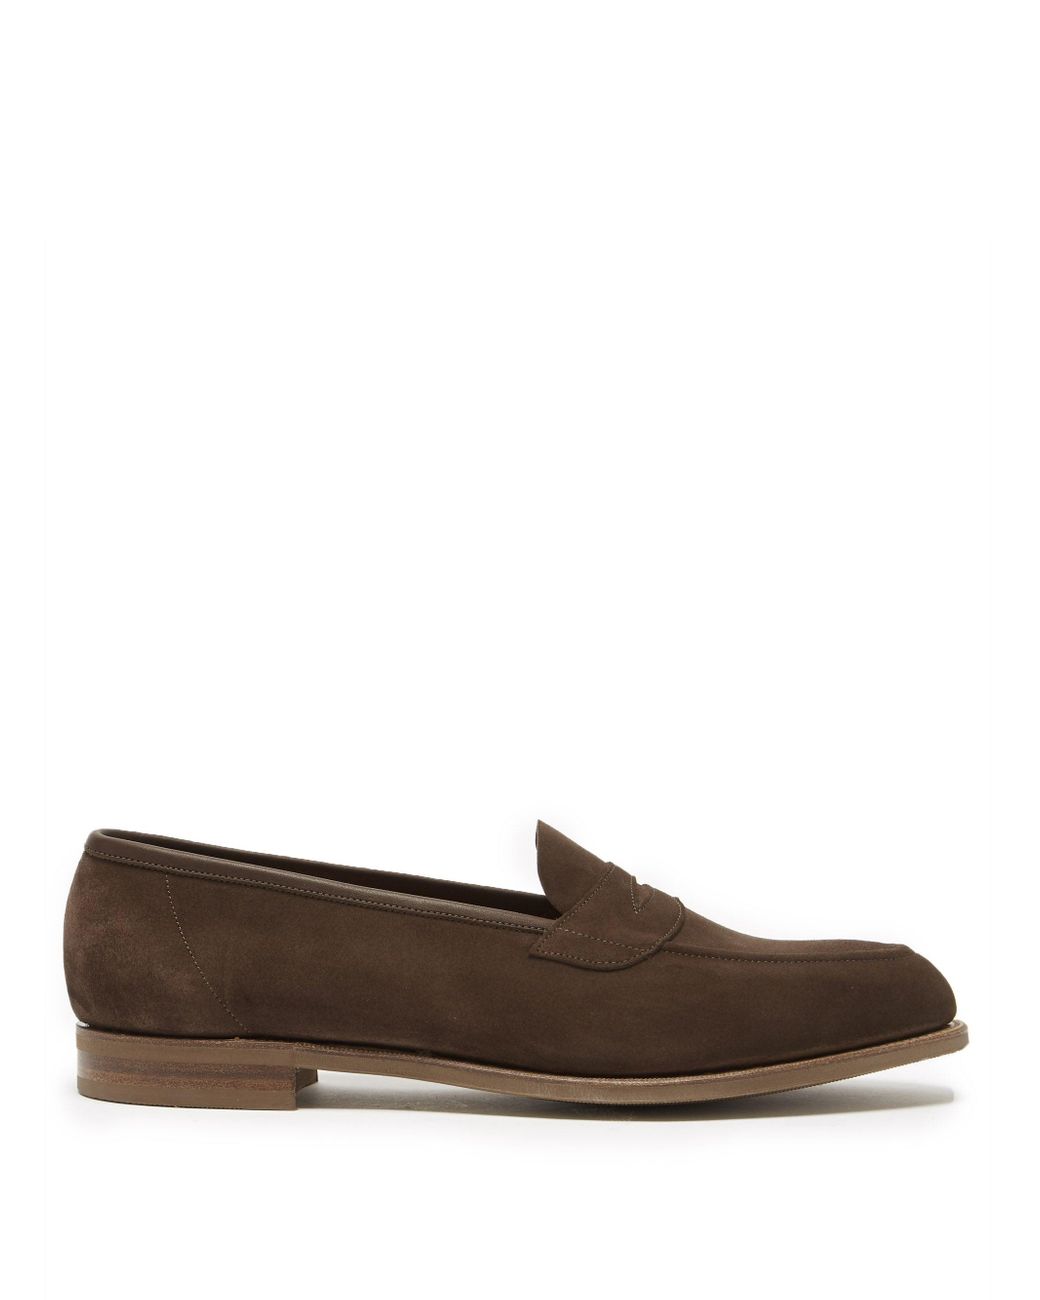 Edward Green Ventnor Suede Penny Loafers in Dark Brown (Brown) for Men ...